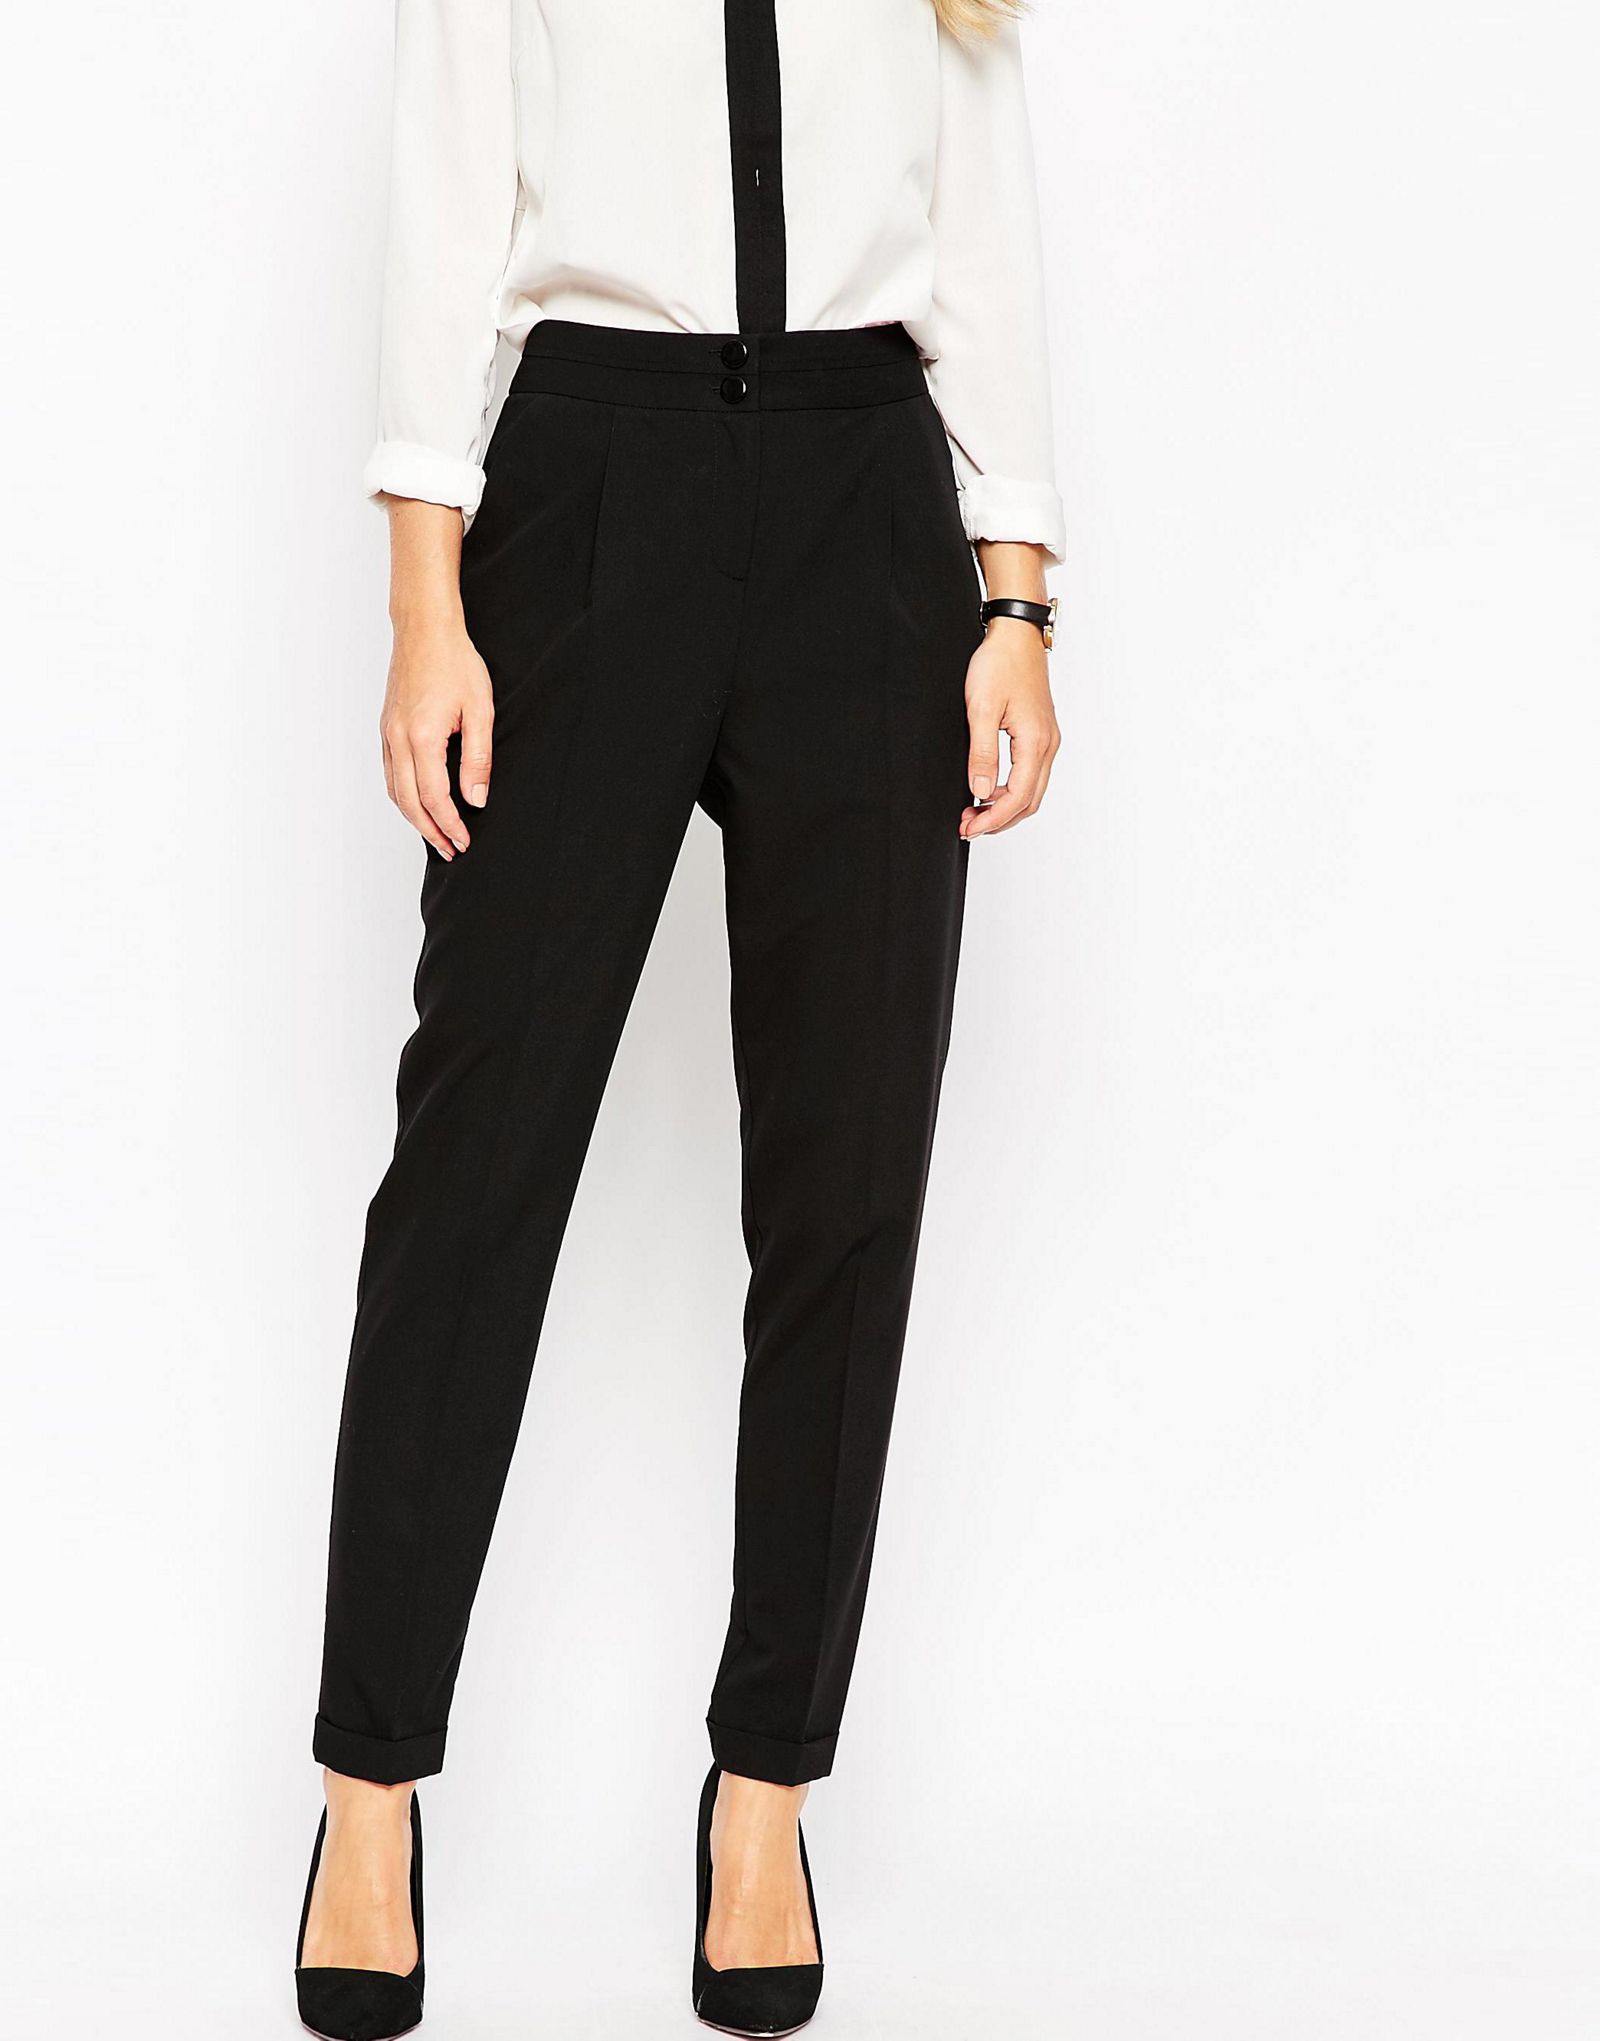 ASOS Tailored High Waisted Pants with Turn Up Detail